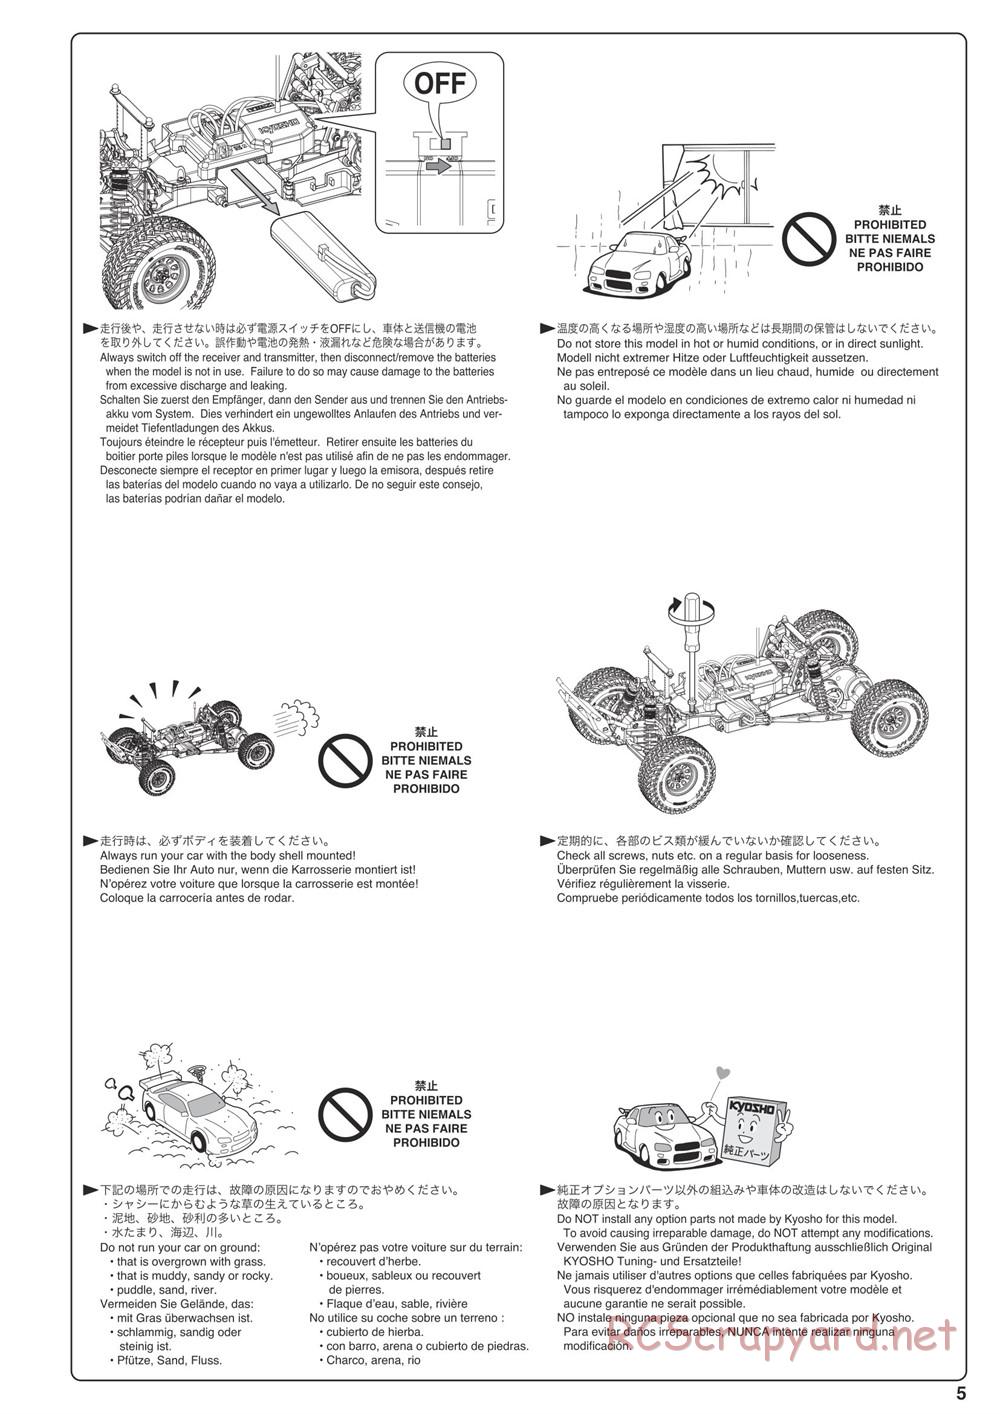 Kyosho - Outlaw Rampage Pro - Manual - Page 5